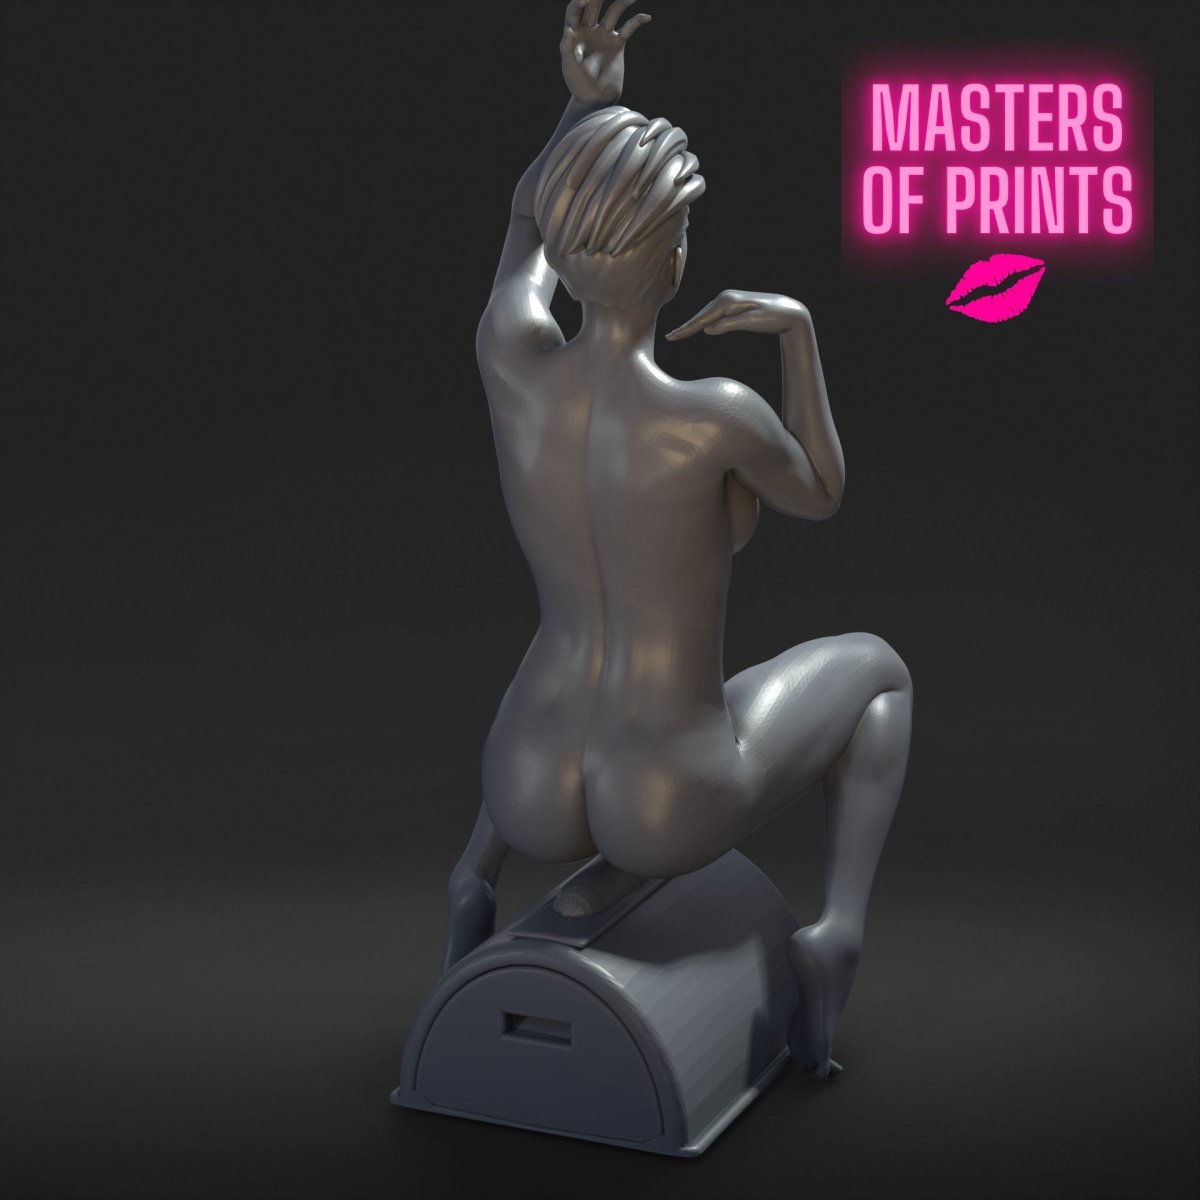 Single Saddle 11 Mature 3d Printed miniature FanArt by Masters Of Prints Collectables Statues & Figurines